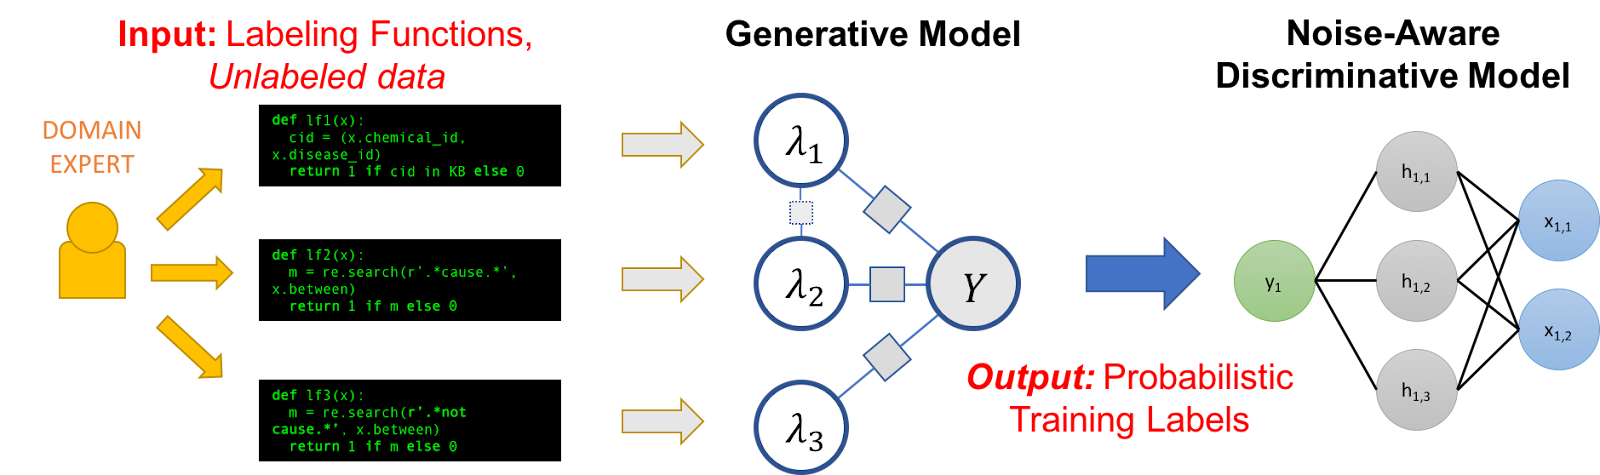 An architectural diagram showing a domain expert creating three code snippets as labeling functions, which feed into a generative model, which produce probabilistic training labels that train a discriminative model.